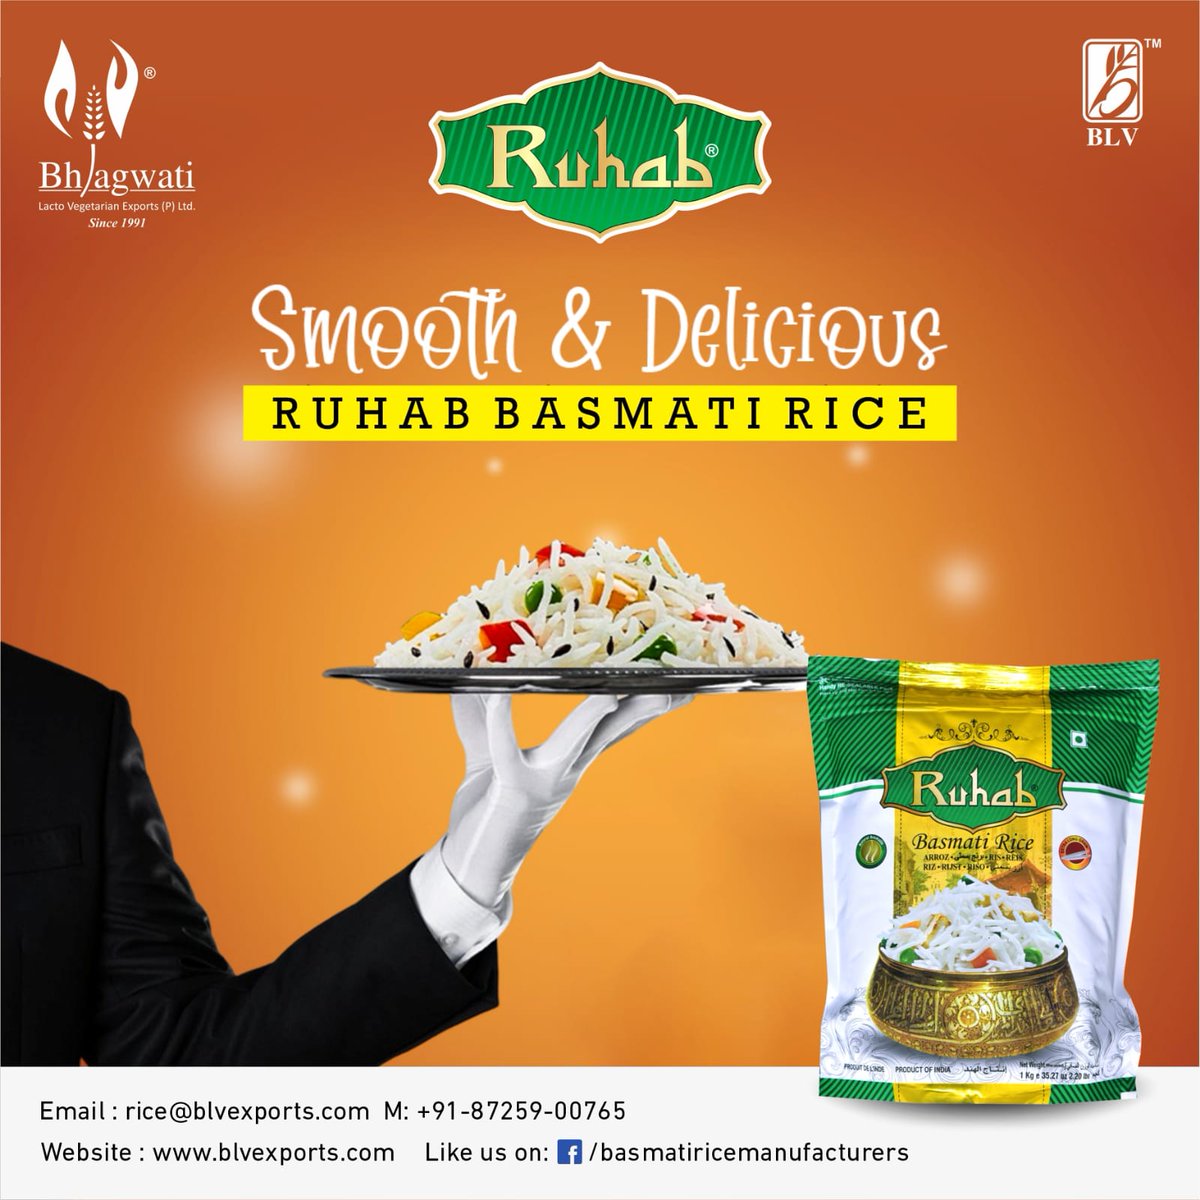 Smooth & Delicious
Ruhab - Extra Long Grain Basmati Rice
Brand is available in 5kg & 1kg
#ruhabbasmatirice #ricemanufacturers #ricemillers #Riceexporters #rice #basmatirice #Riceexporters #blvexports #biryanirice #deliciousfood #biryanilove

blvexports.com/ruhab_basmati_…